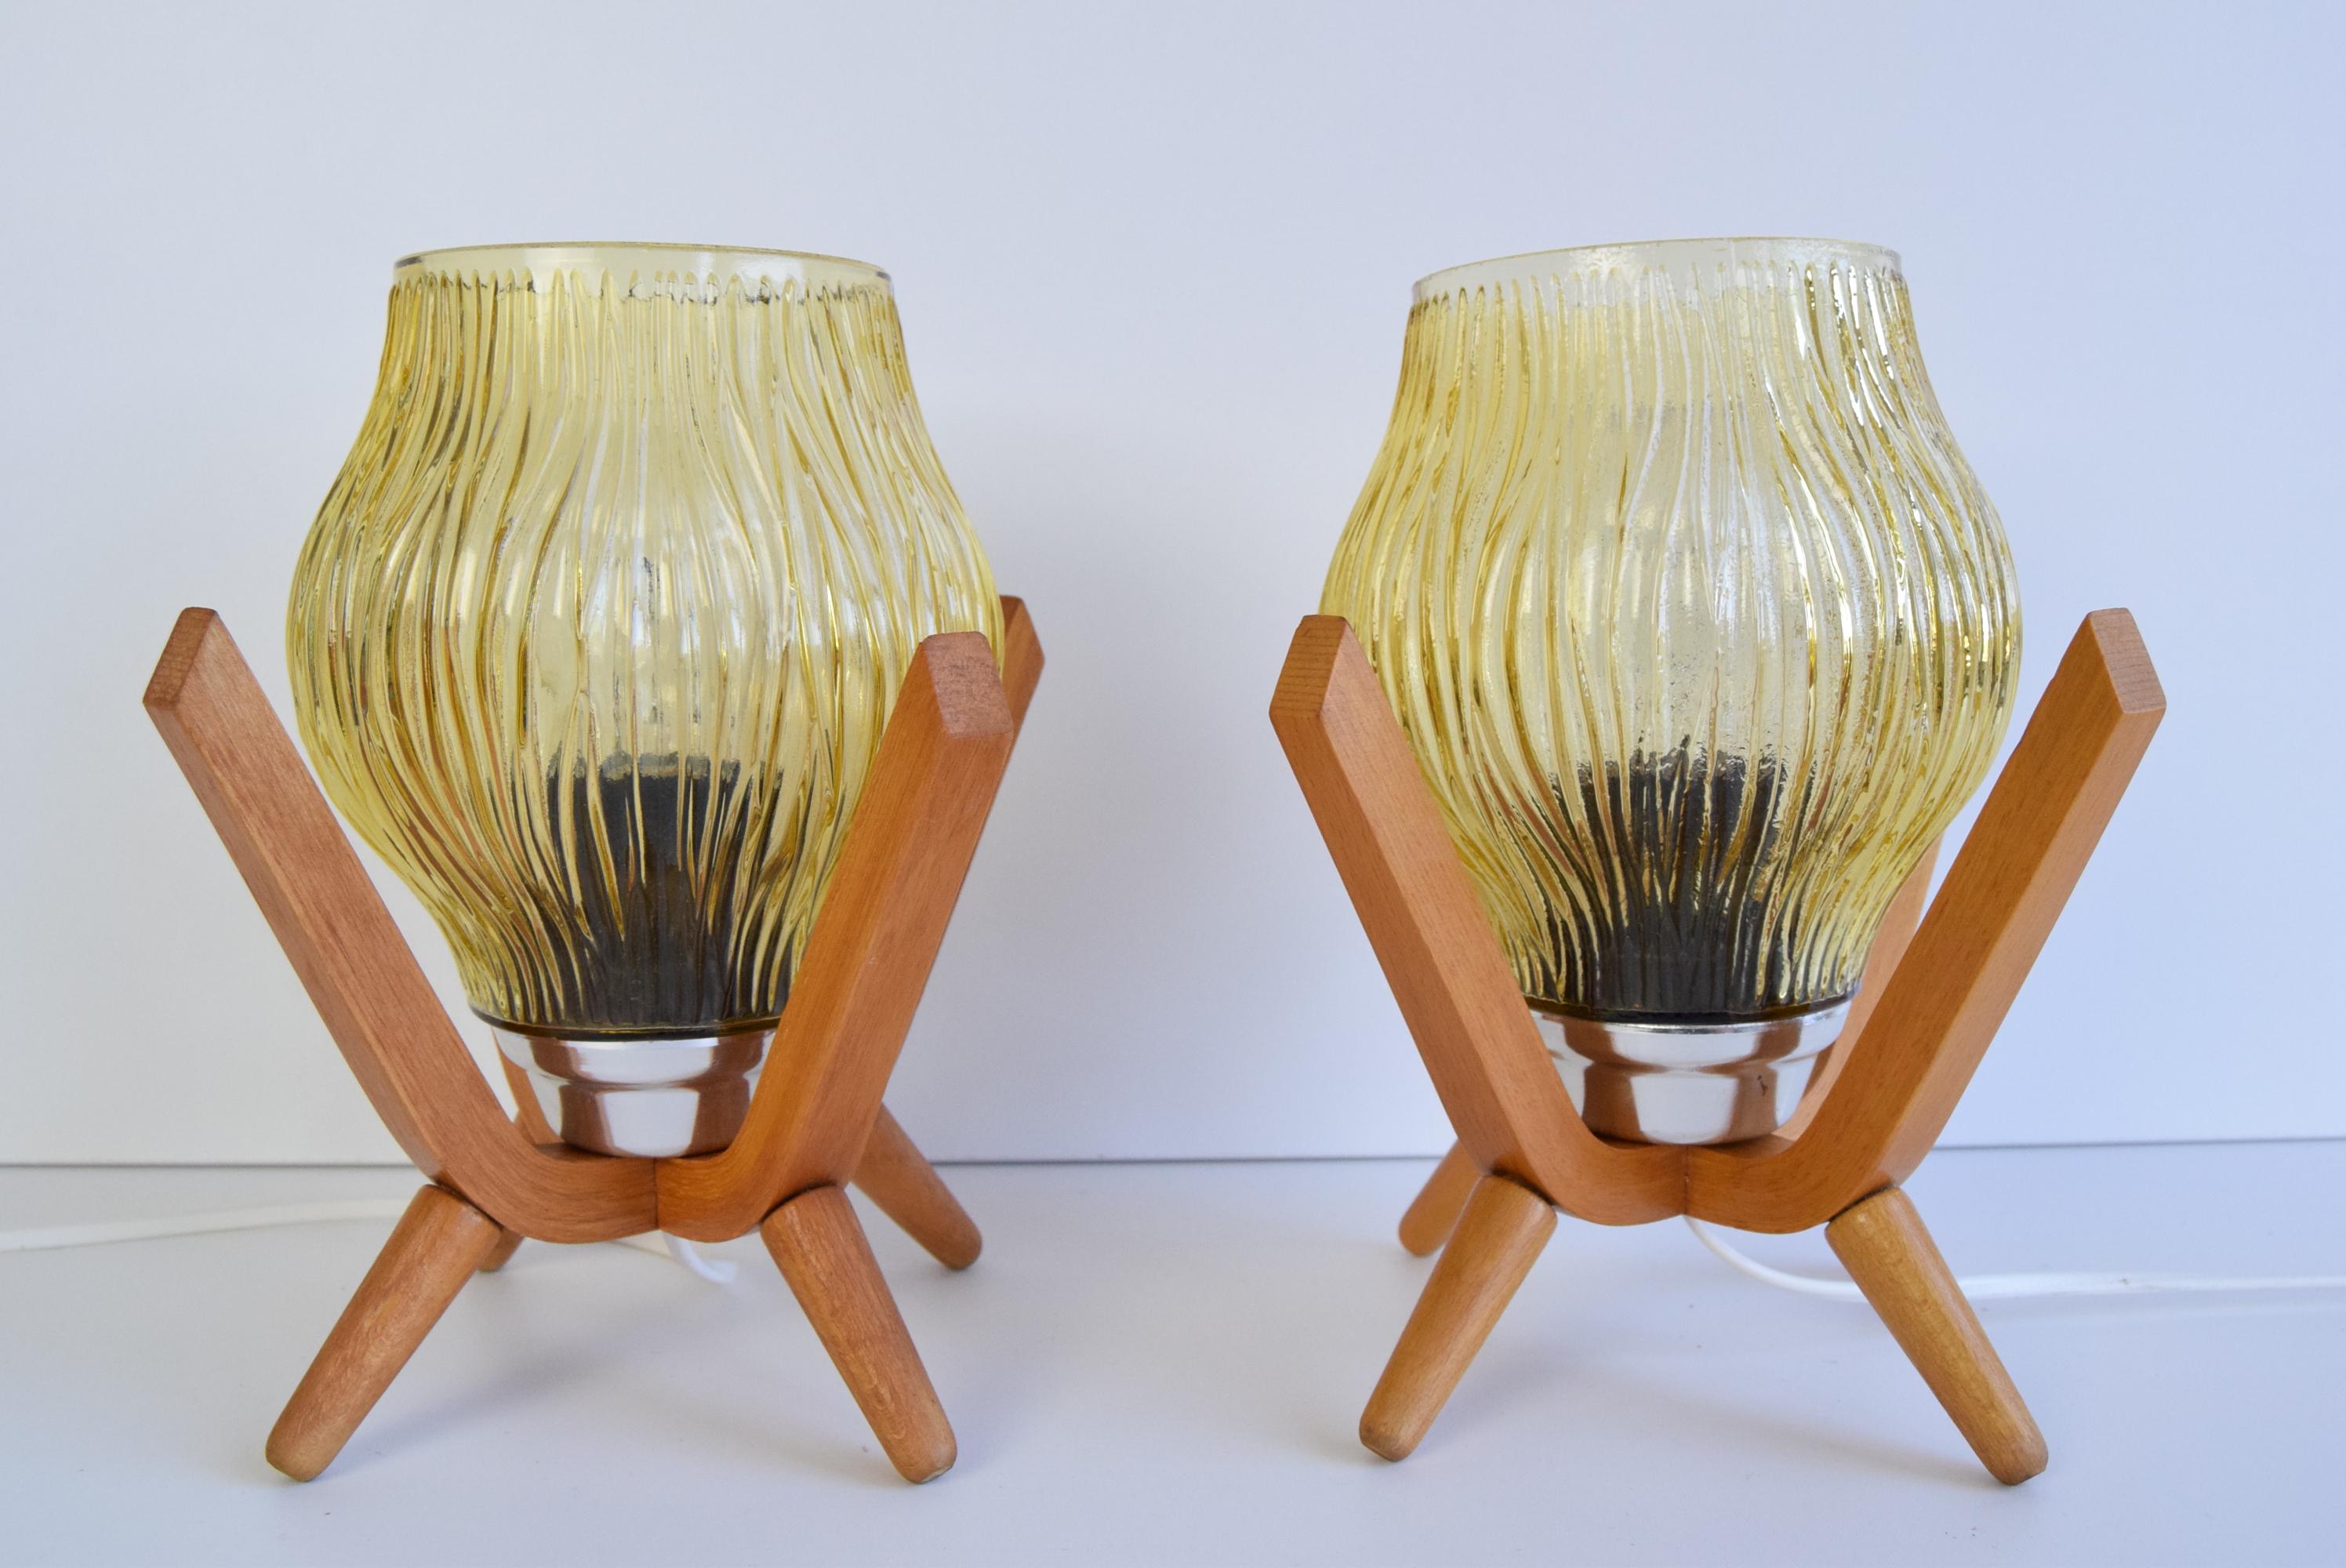 Czech Pair of mid-century Wooden Design Table Lamps, by Dřevo Humpolec, 1970's.  For Sale